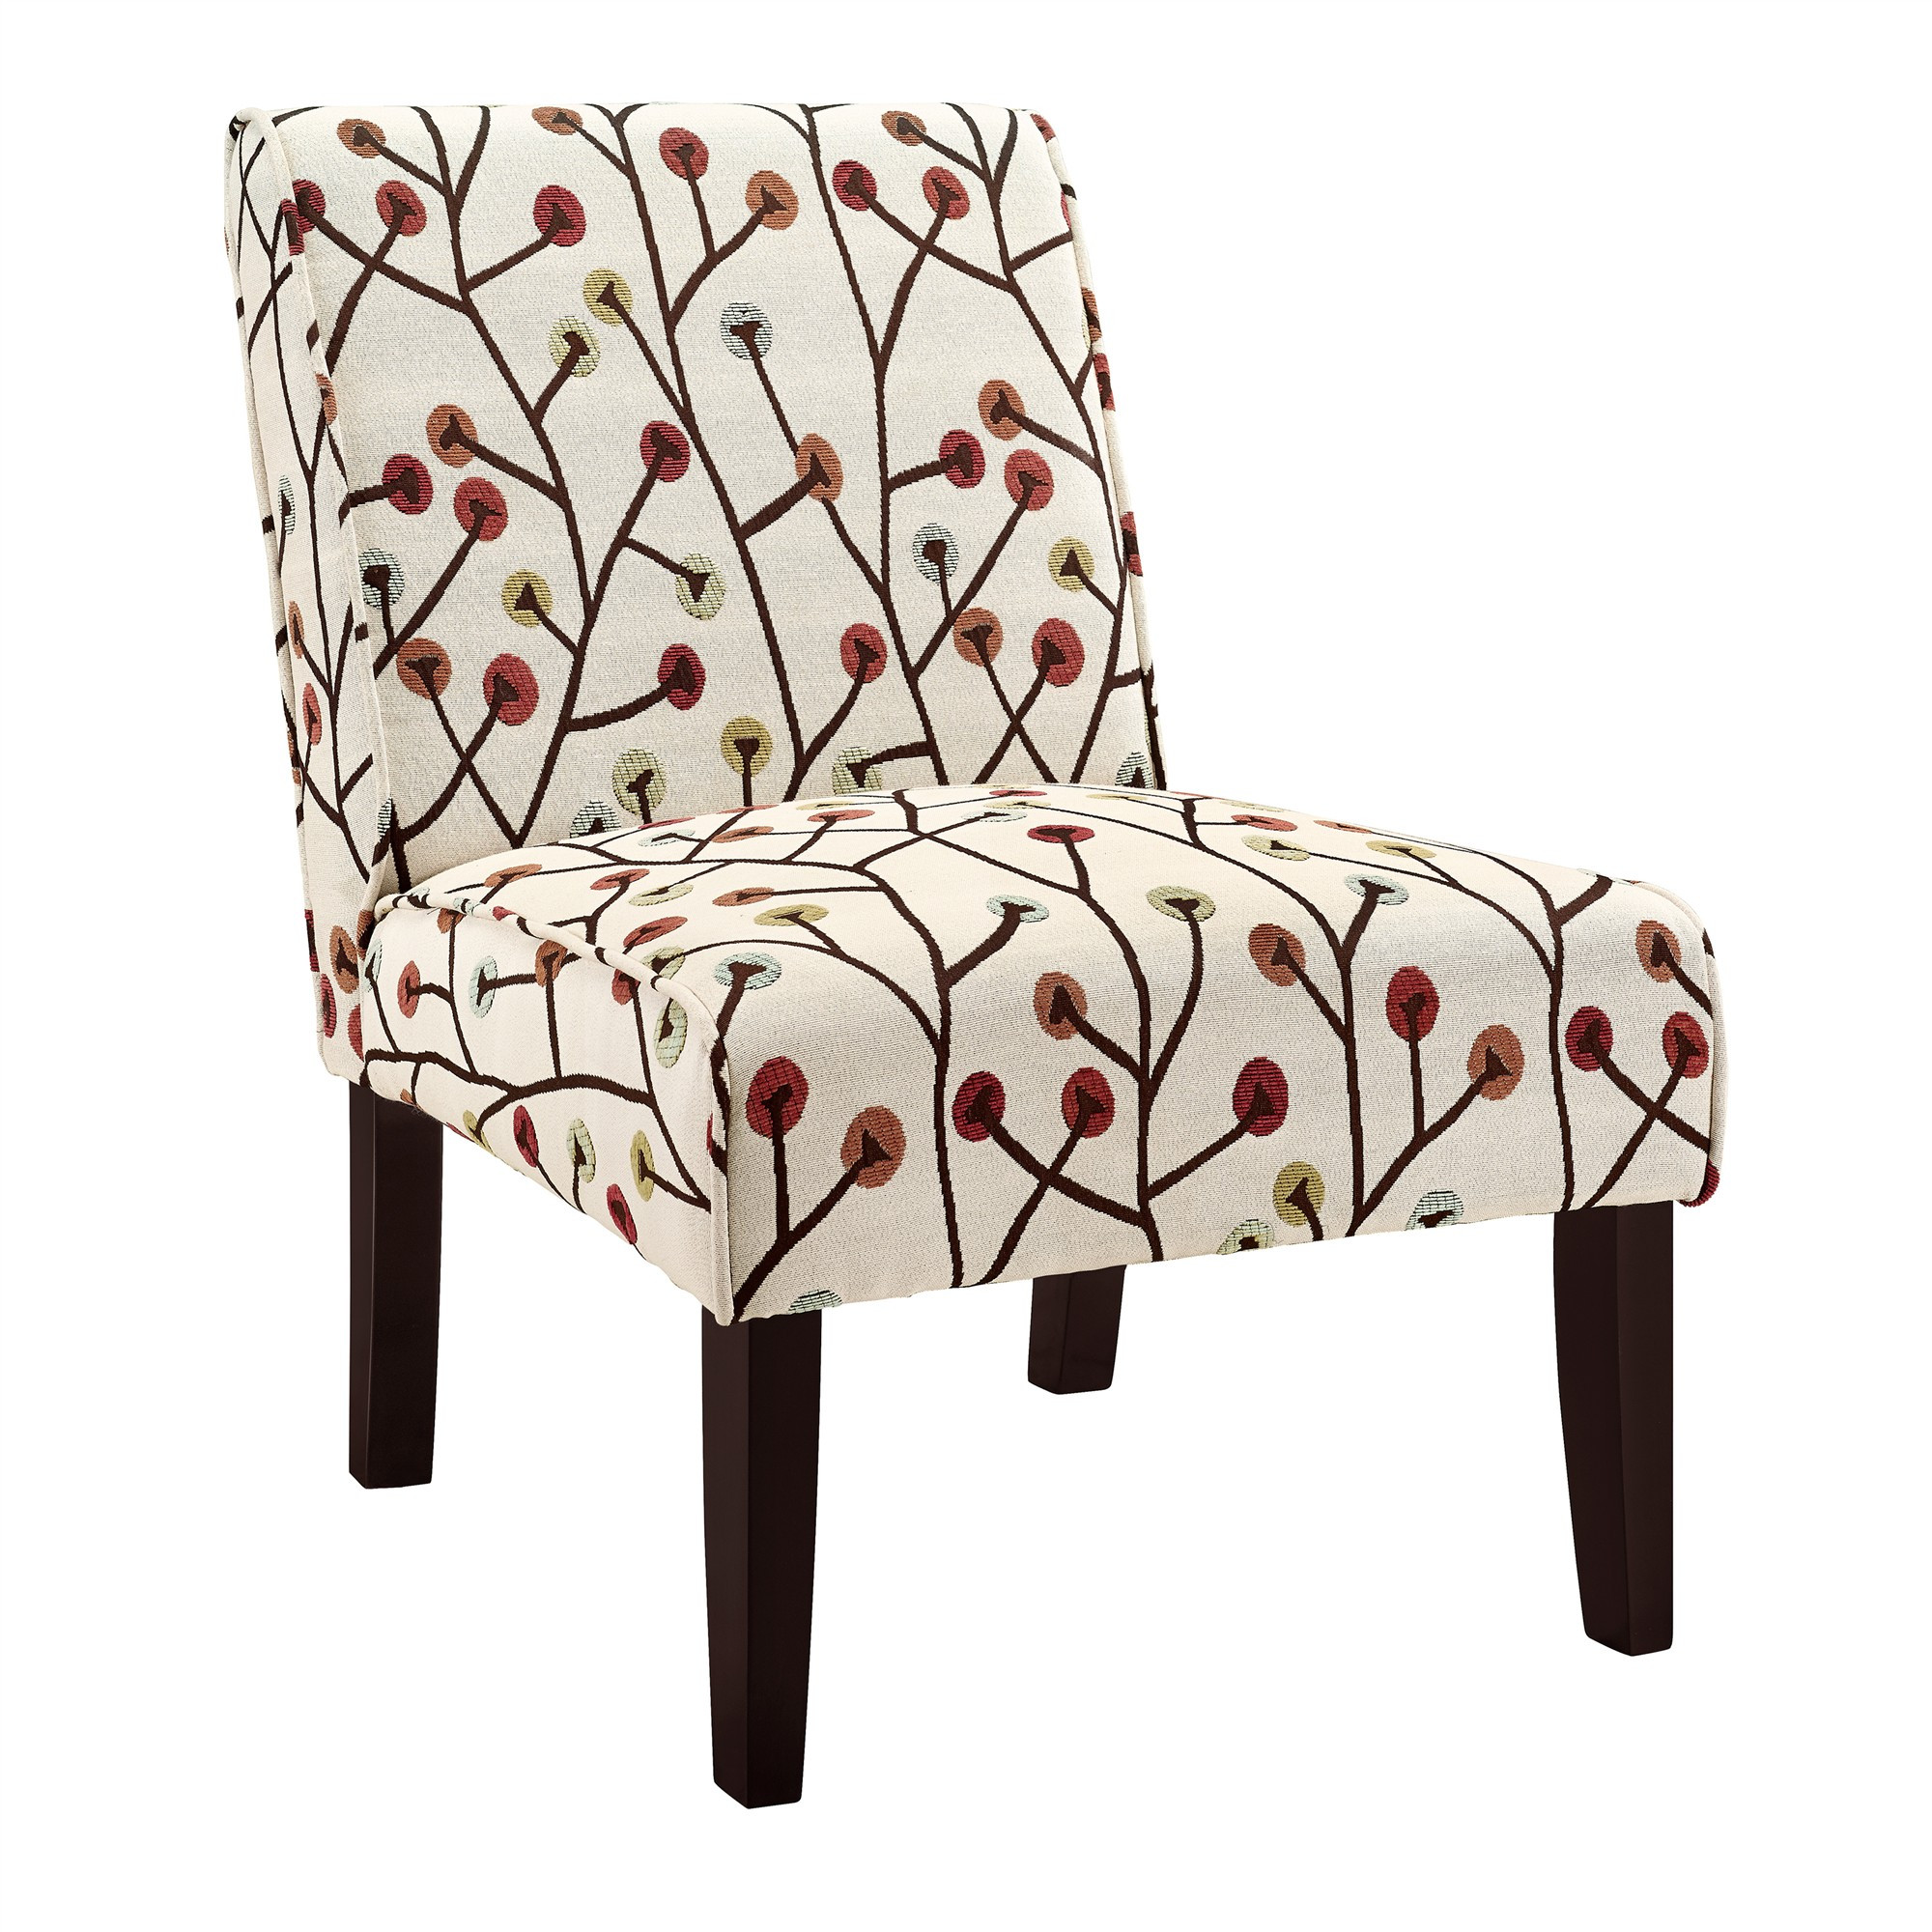 Floral Living Room Chairs
 Dorel Living